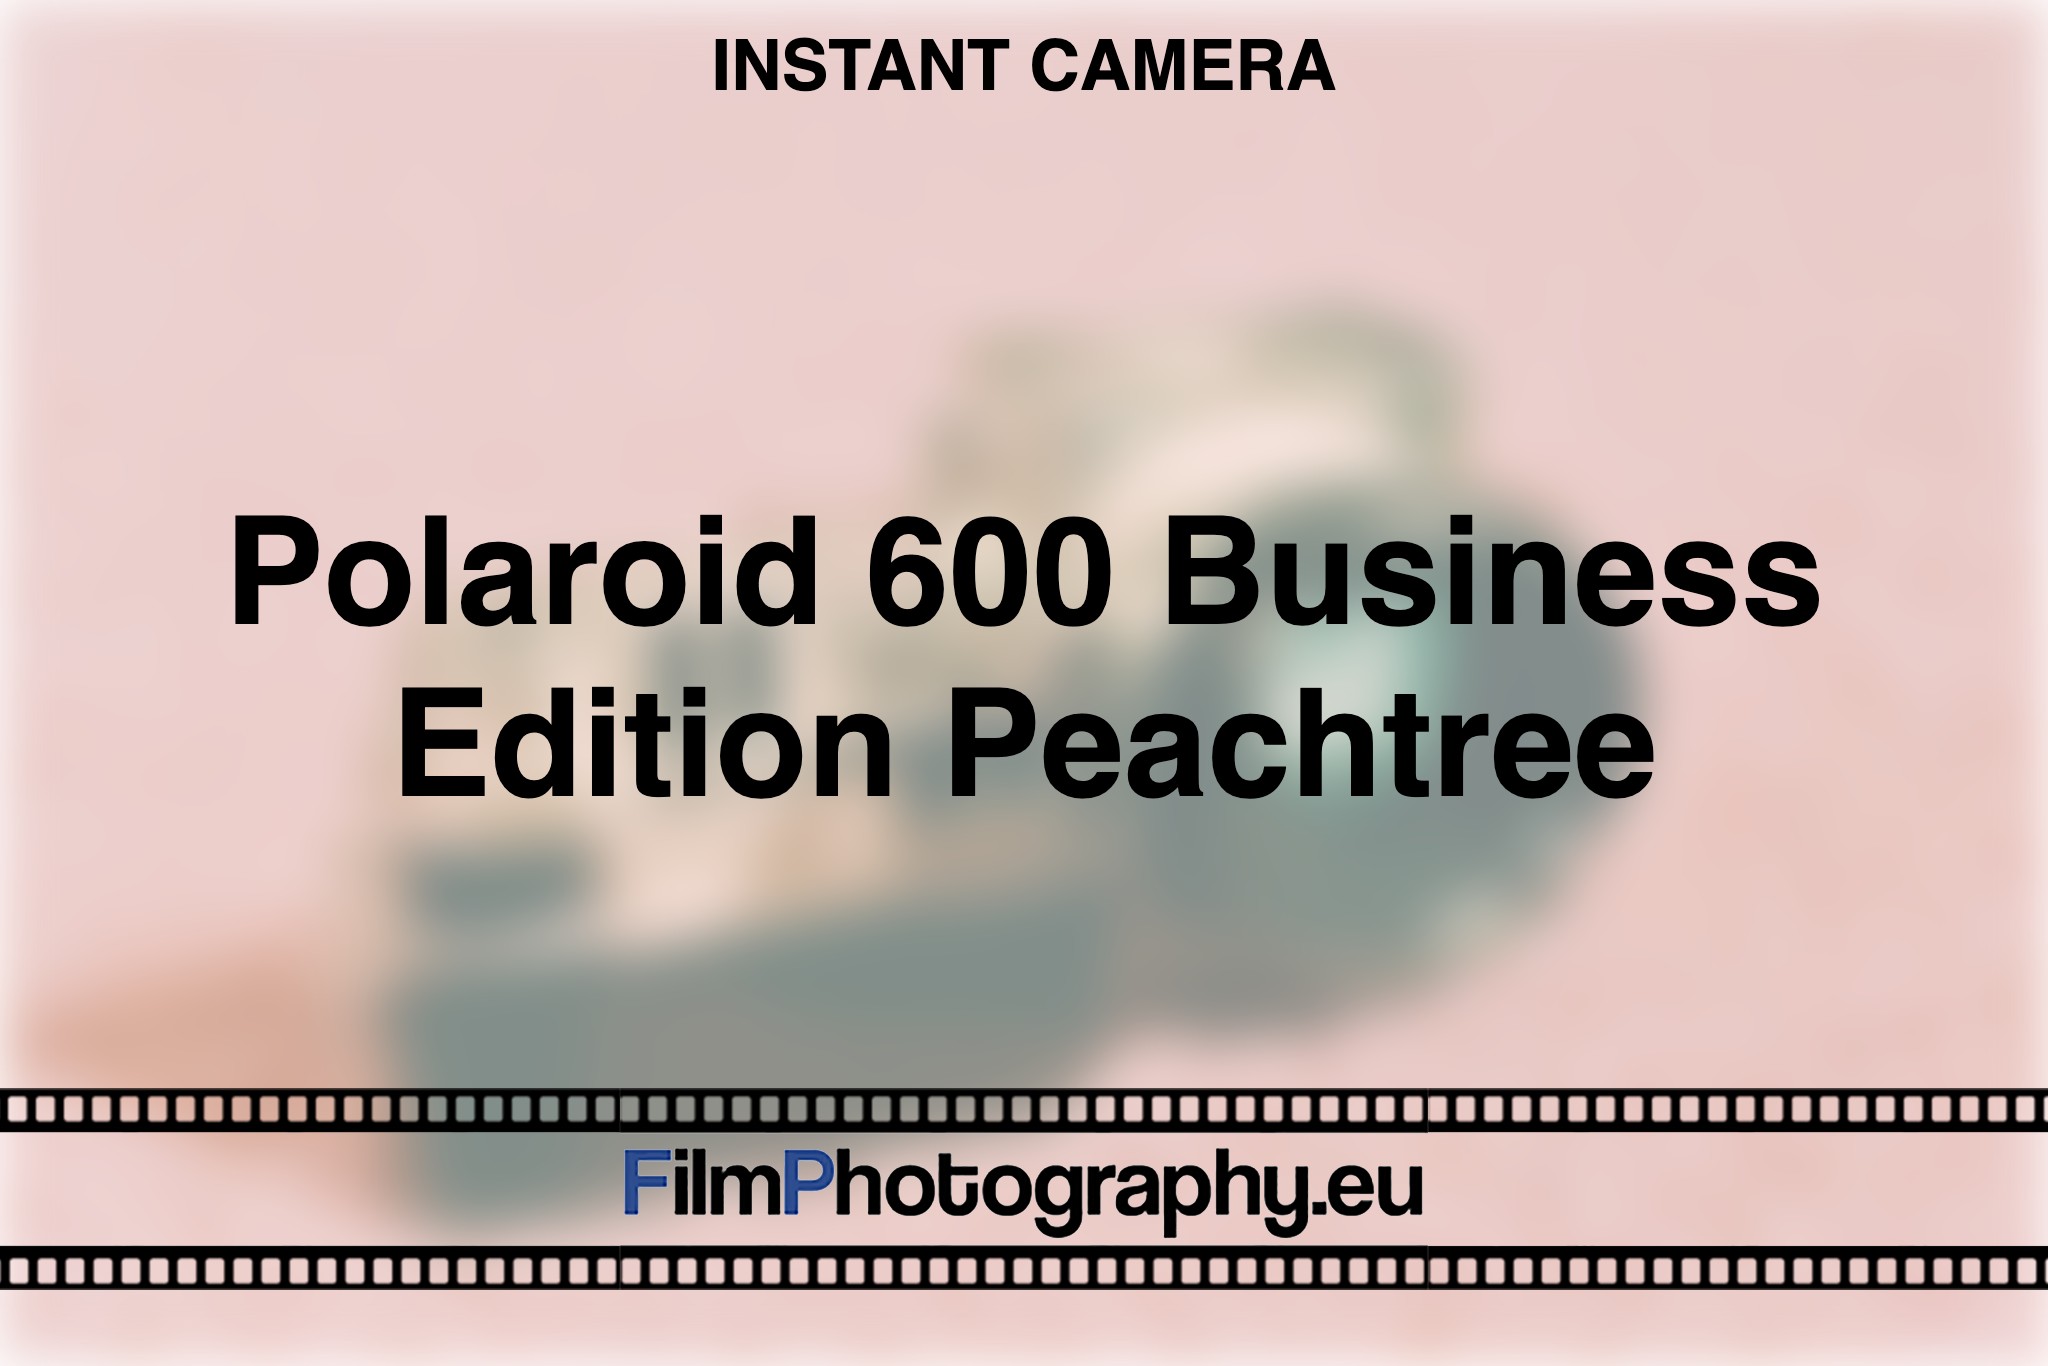 polaroid-600-business-edition-peachtree-instant-camera-bnv